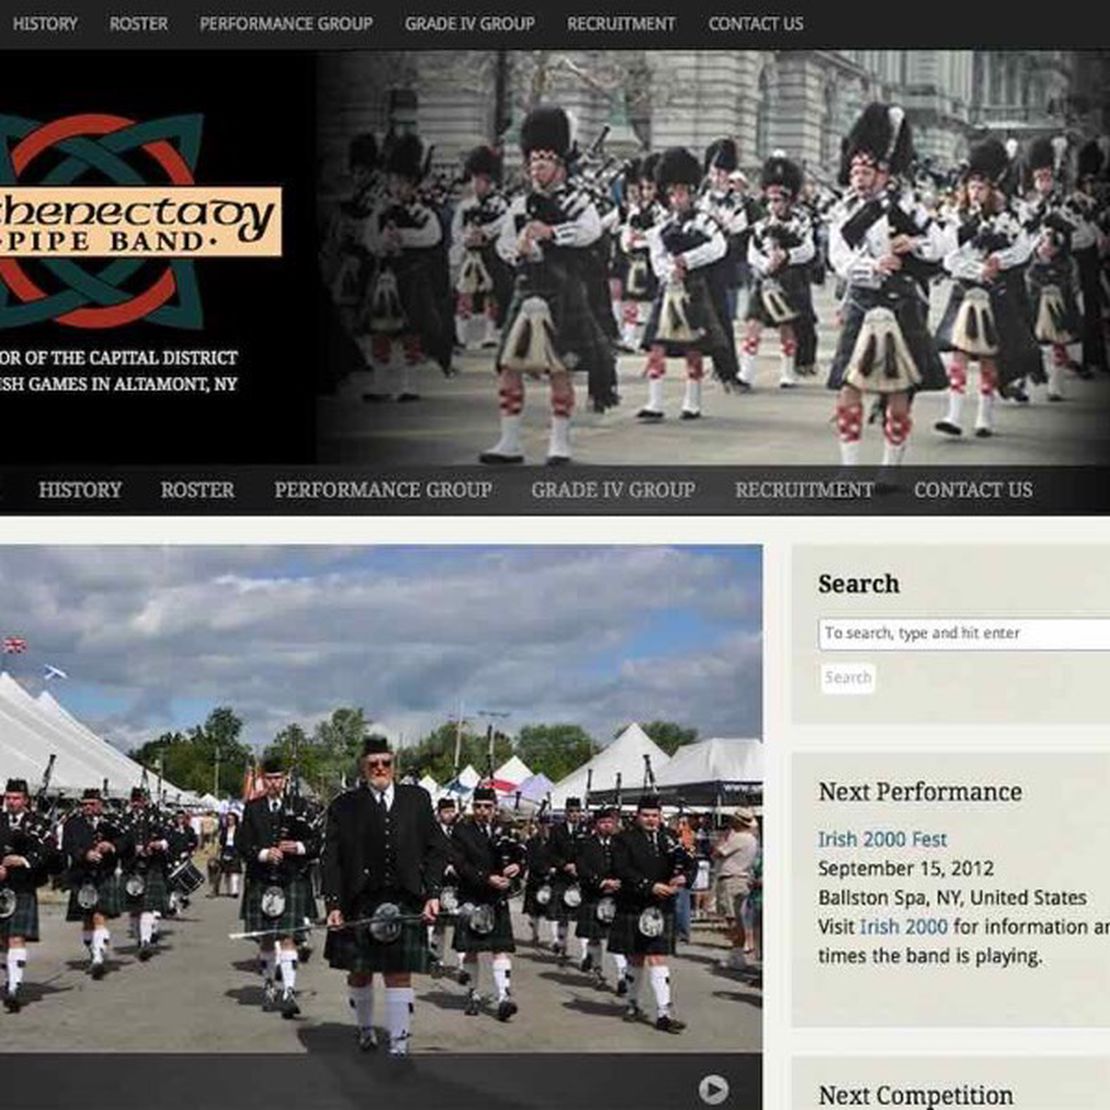 schenectady pipe band